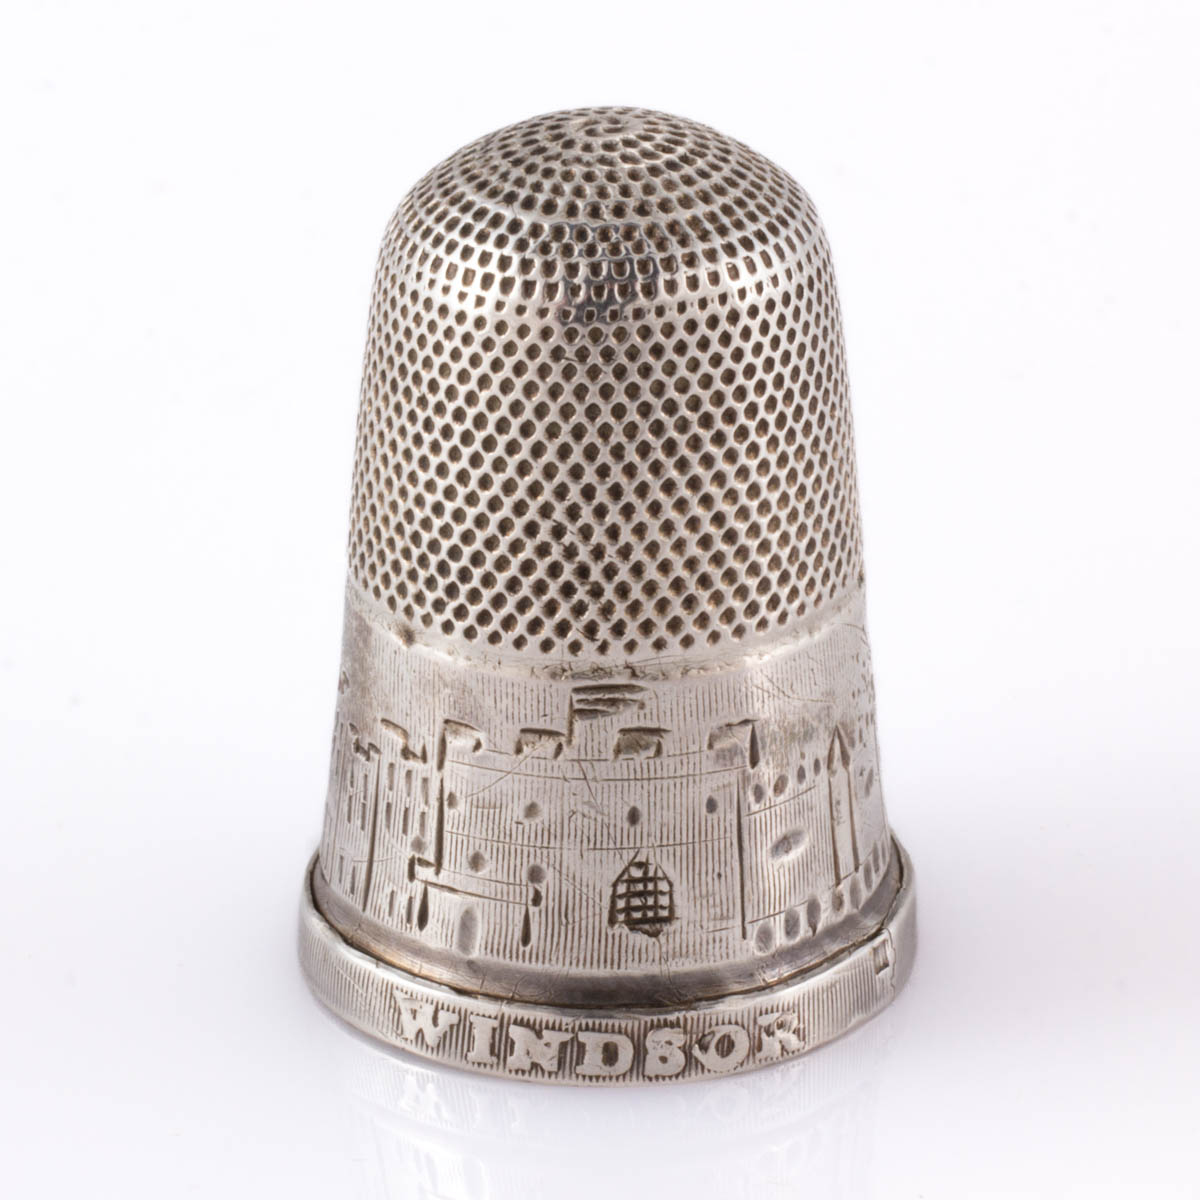 ENGLISH WINDSOR CASTLE COMMEMORATIVE SILVER SEWING THIMBLE